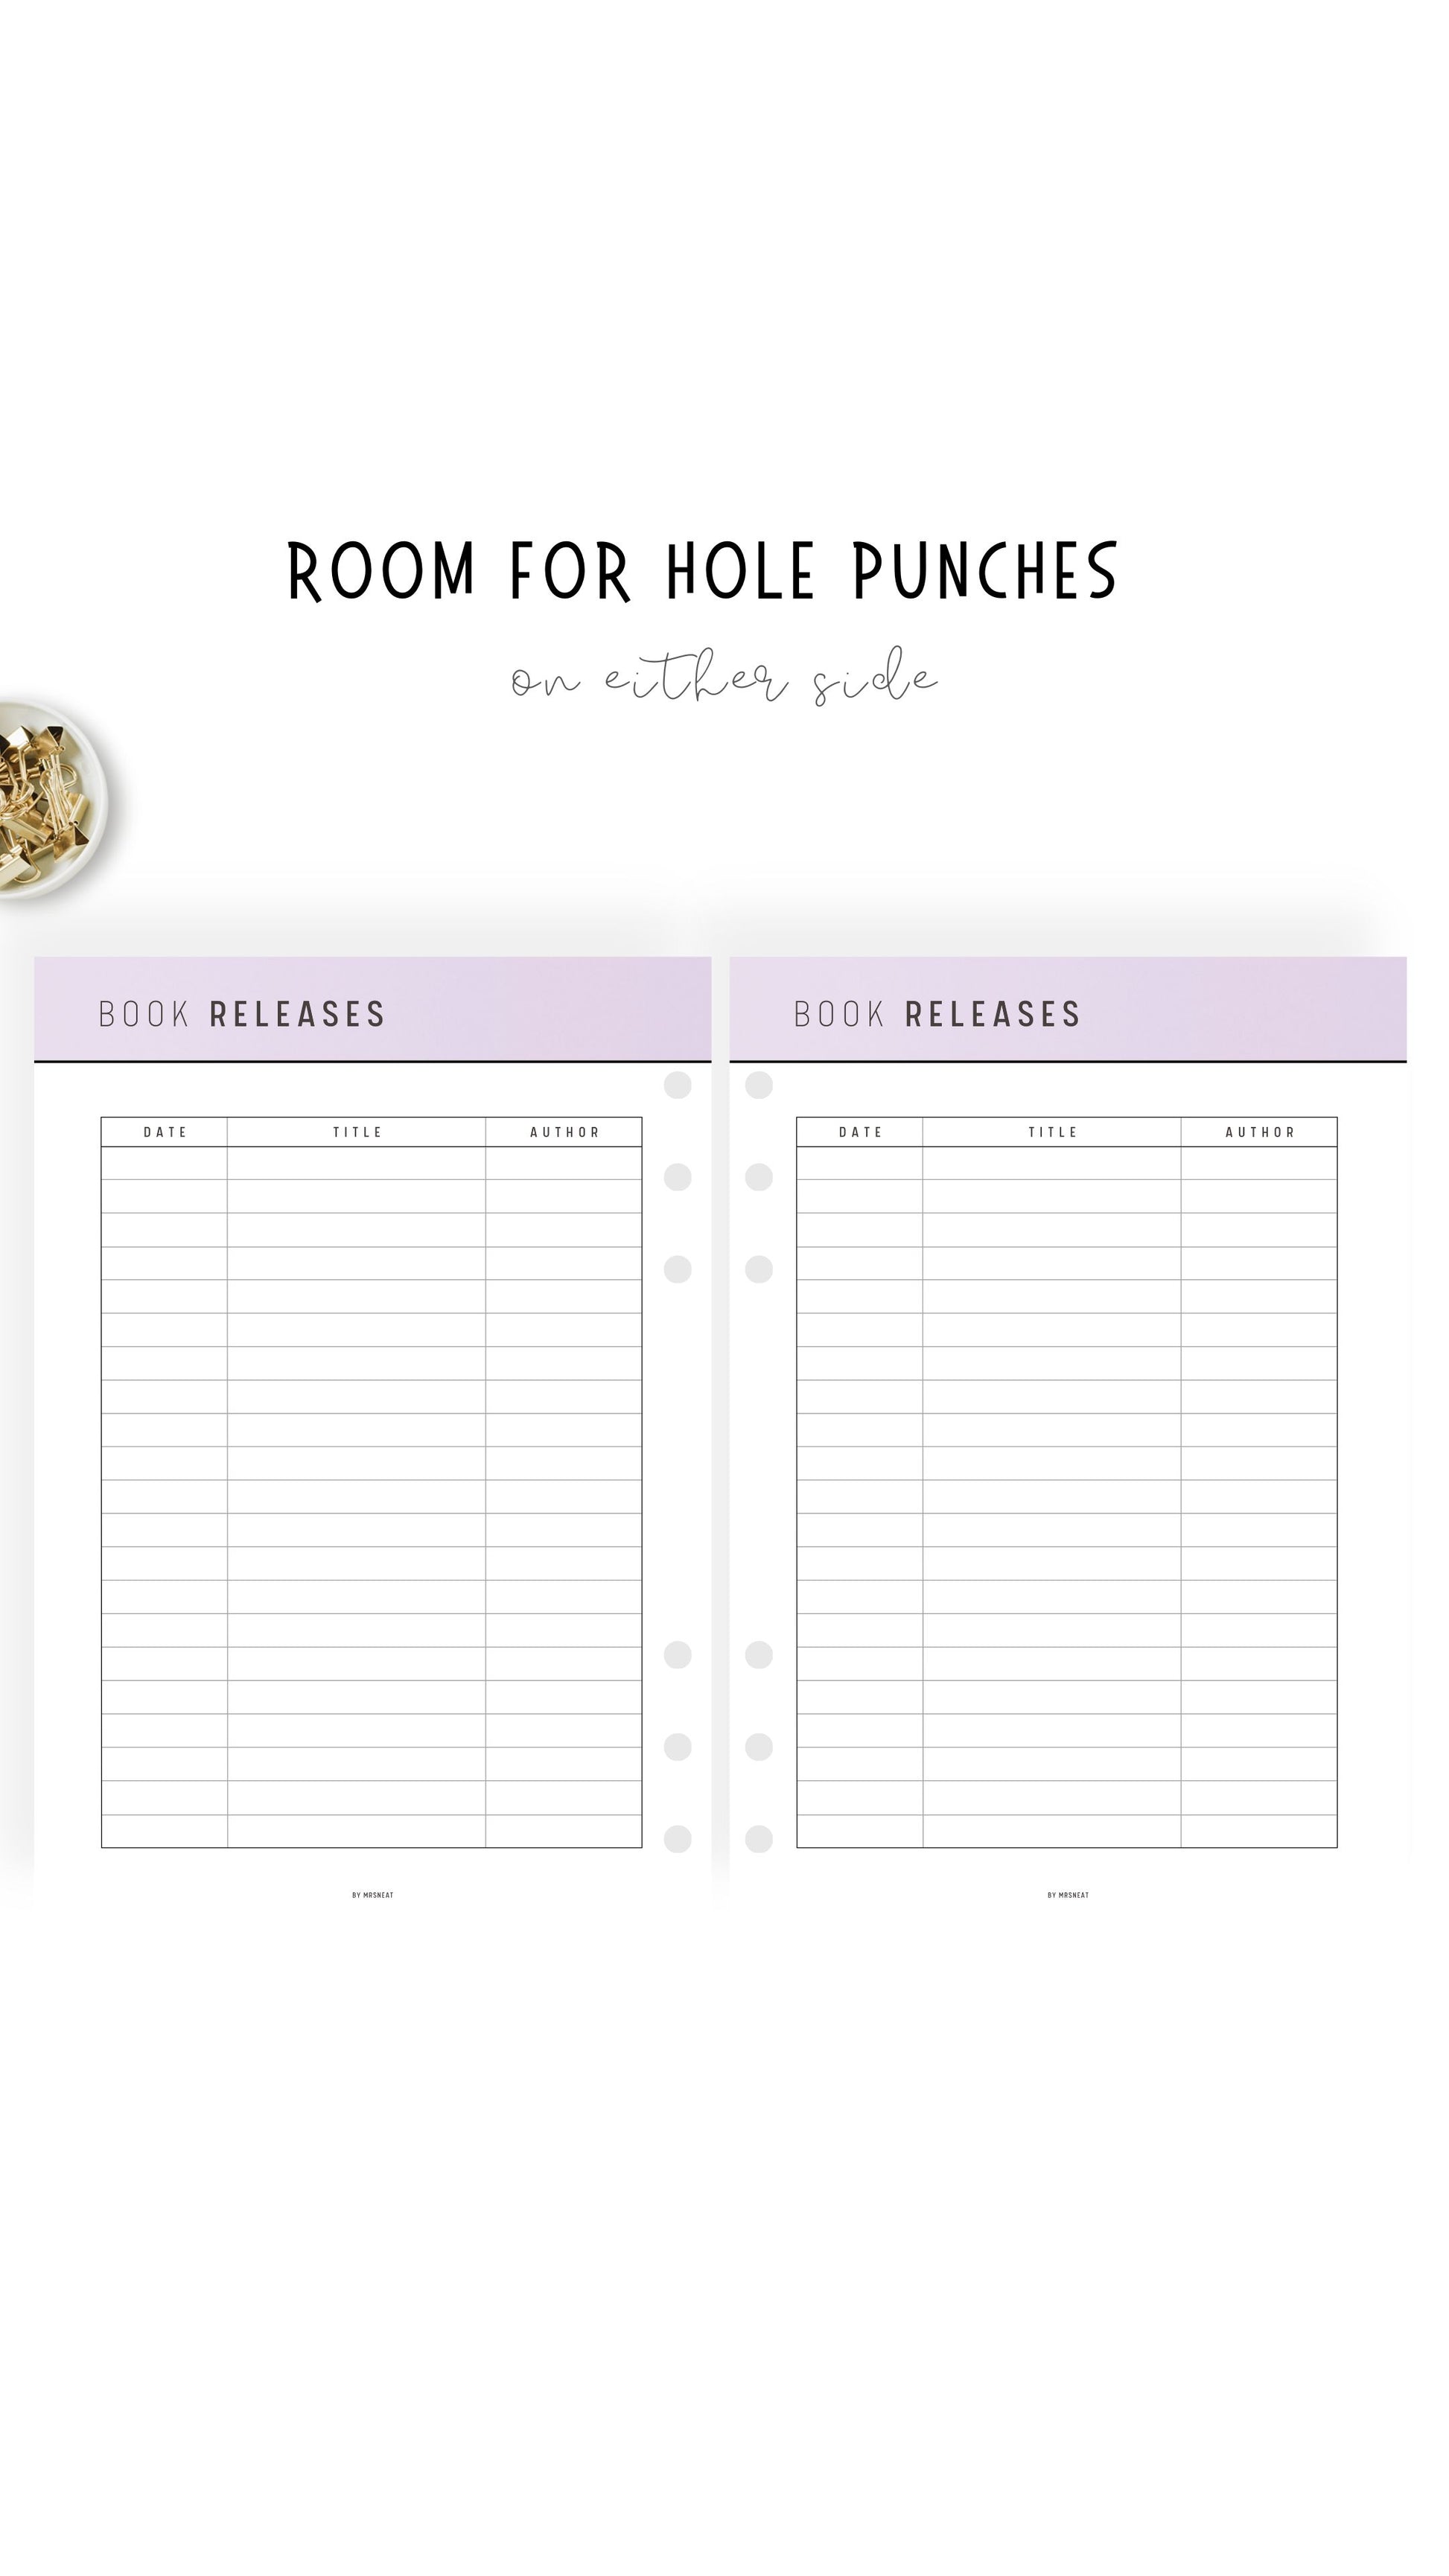 Purple Upcoming Book Releases Template Printable